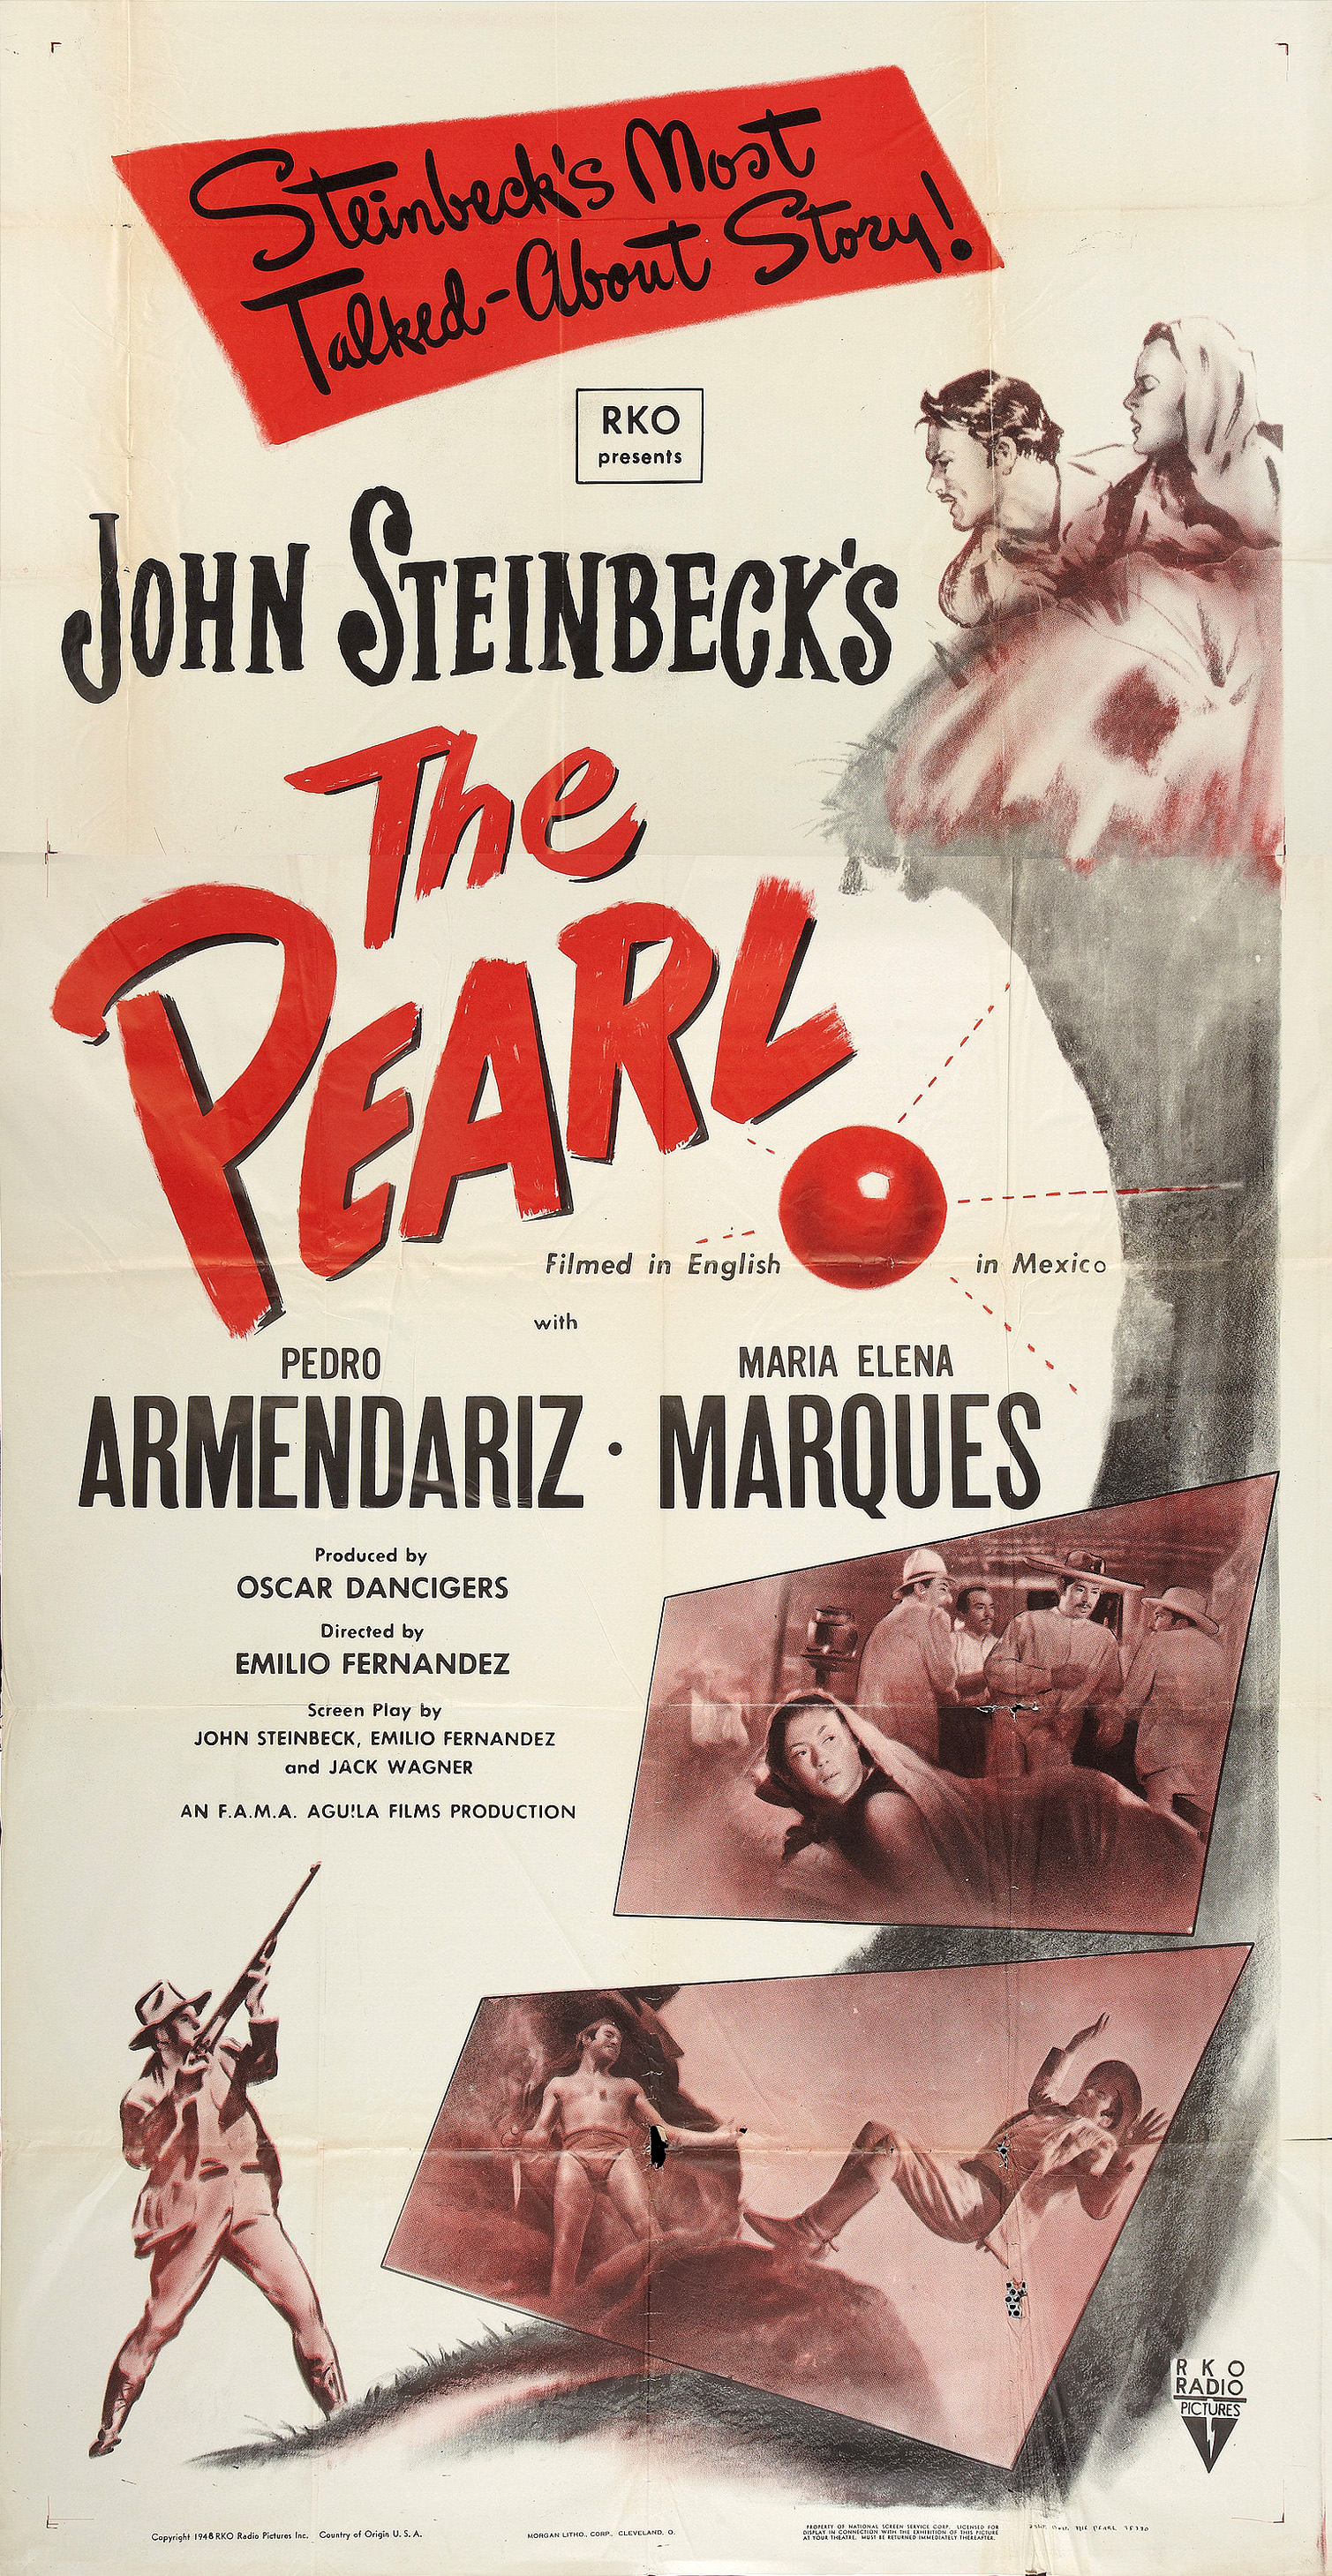 The Pearl (film)